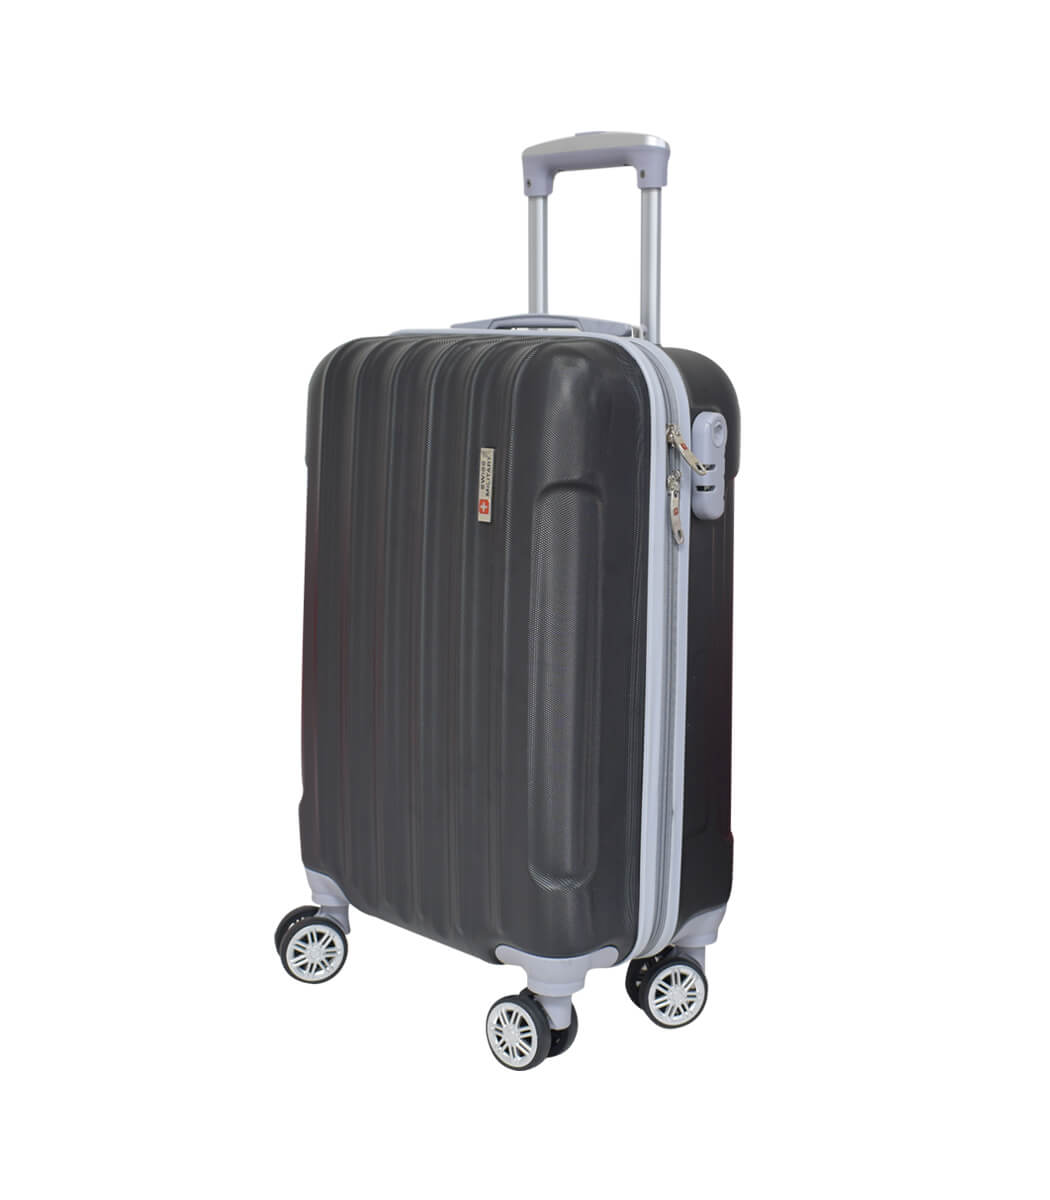 HTL83_TW2 – Polycarbonate Cabin Size Luggage with Travel Luggage Belt (HTL83+TW2)